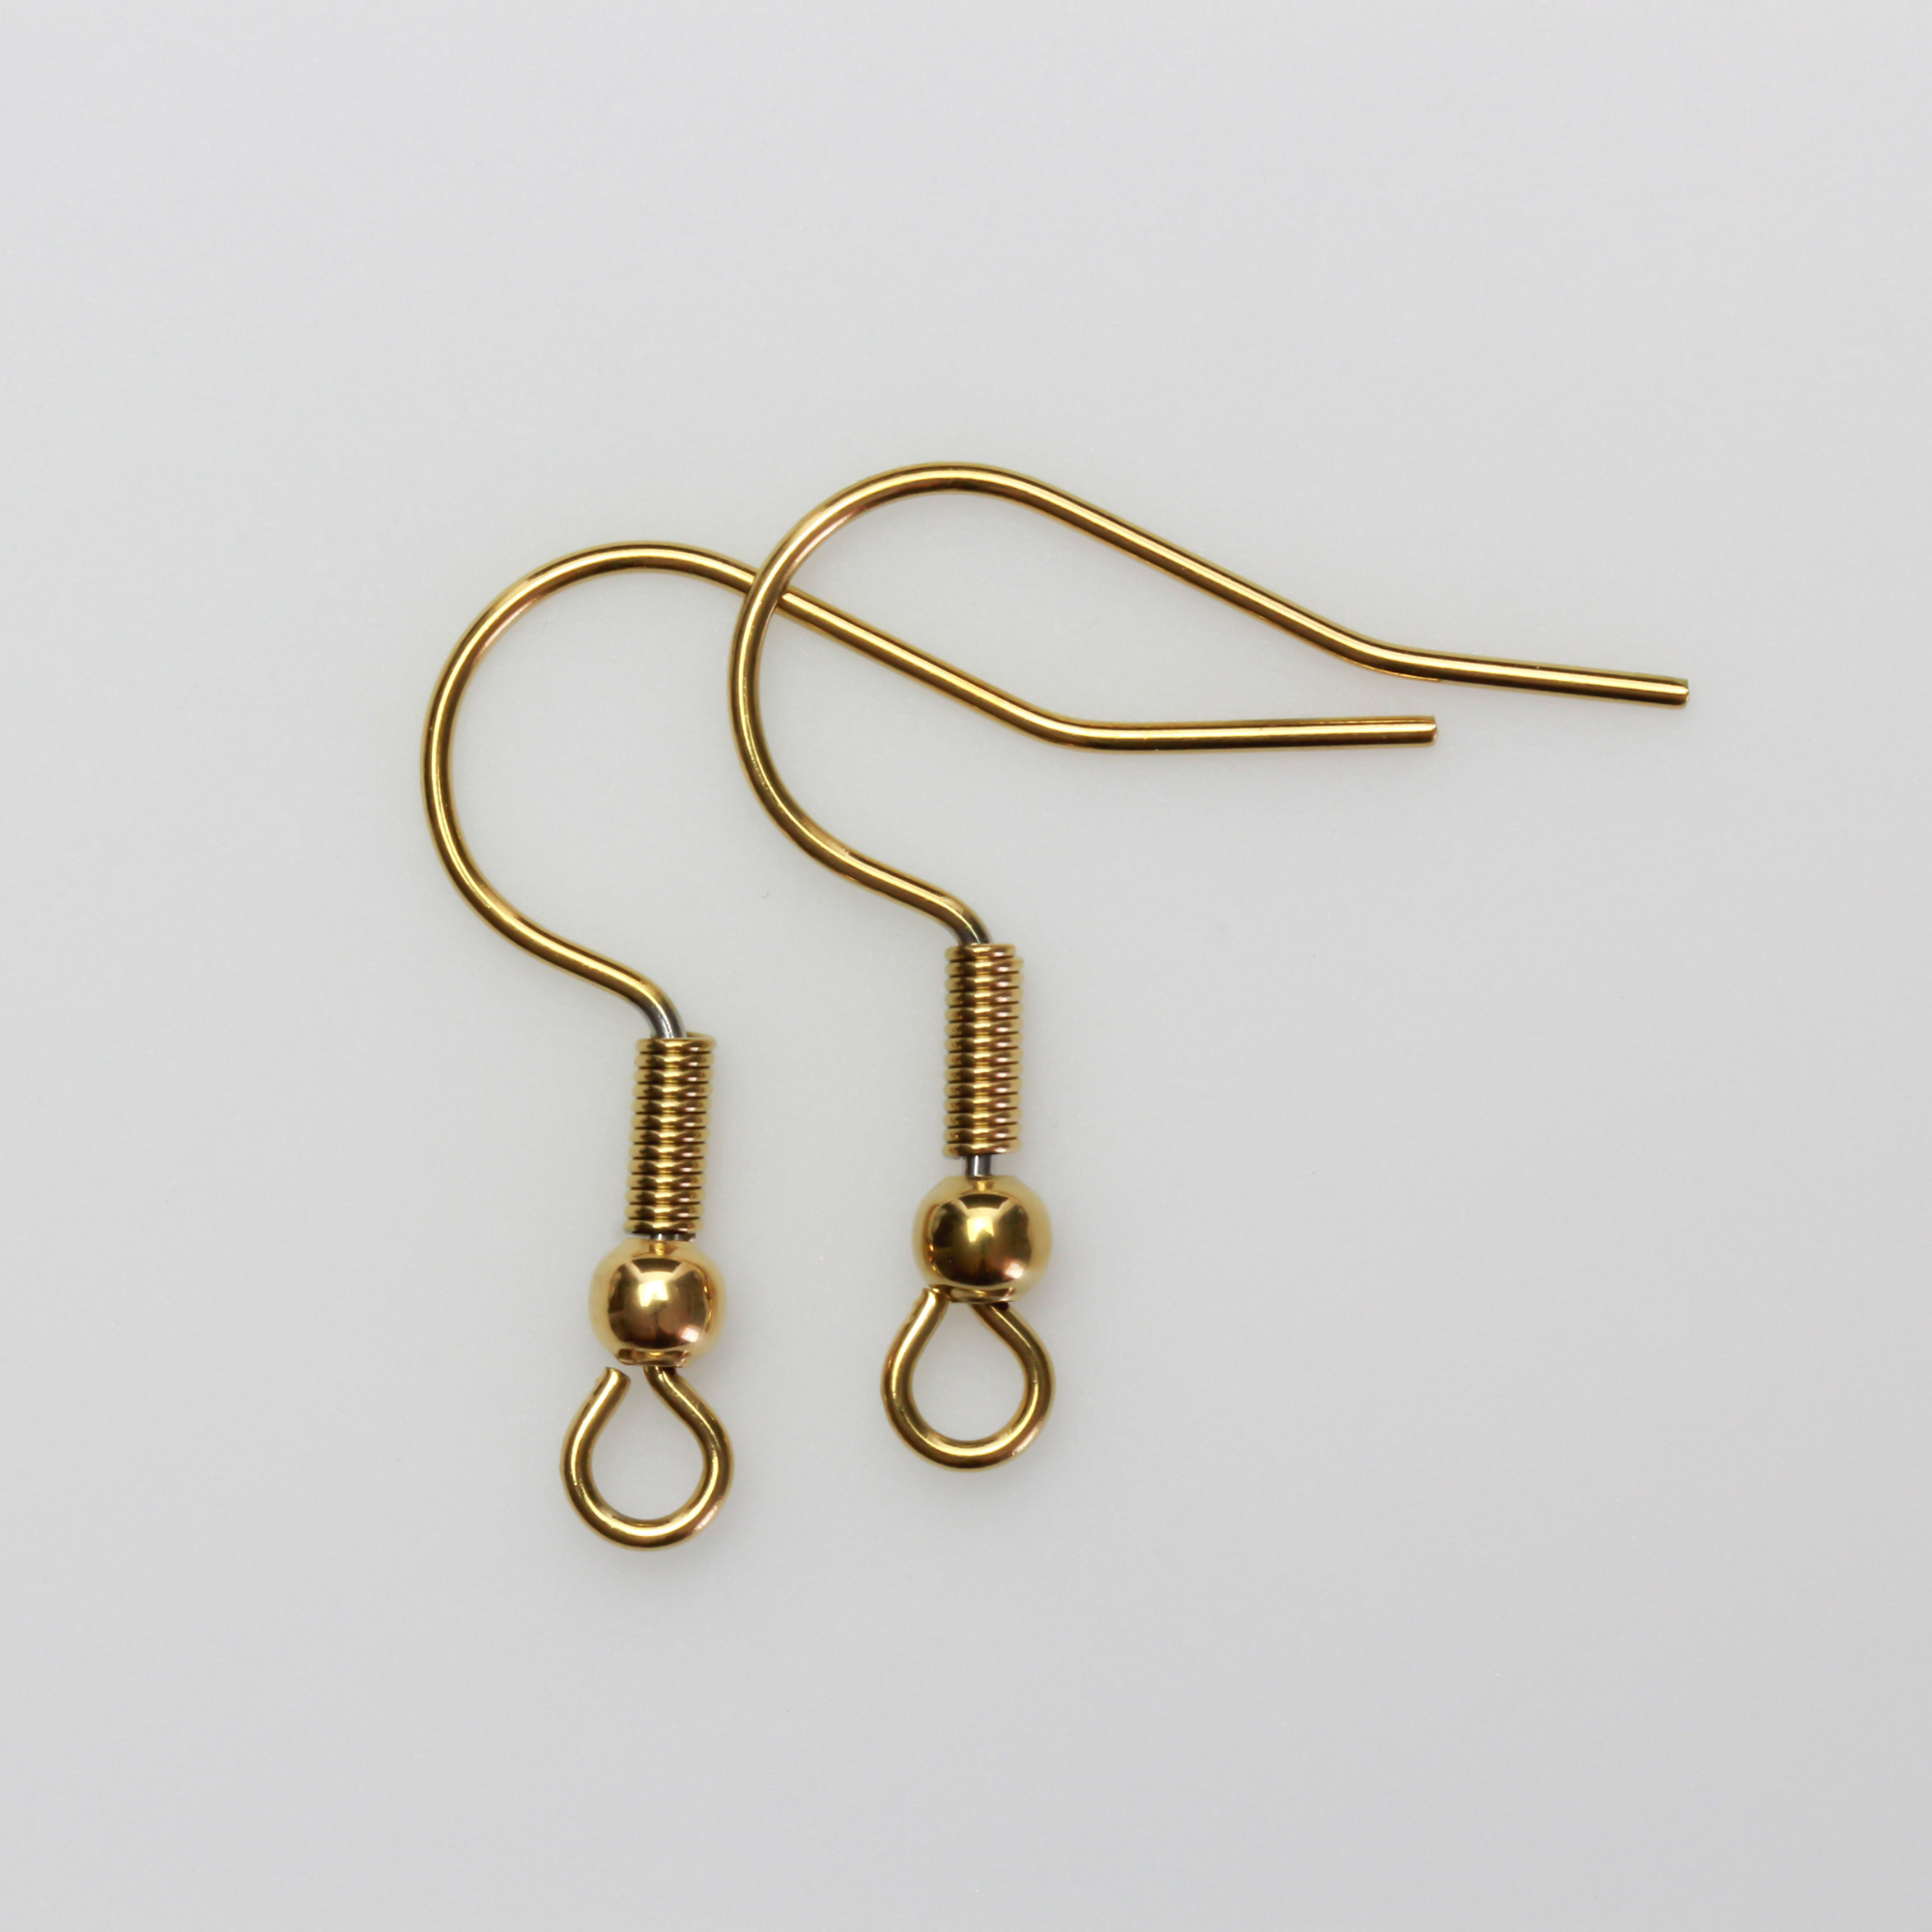 304 Stainless steel earring hooks that have 18k gold plating with a horizontal loop, 21 gauge wire. 